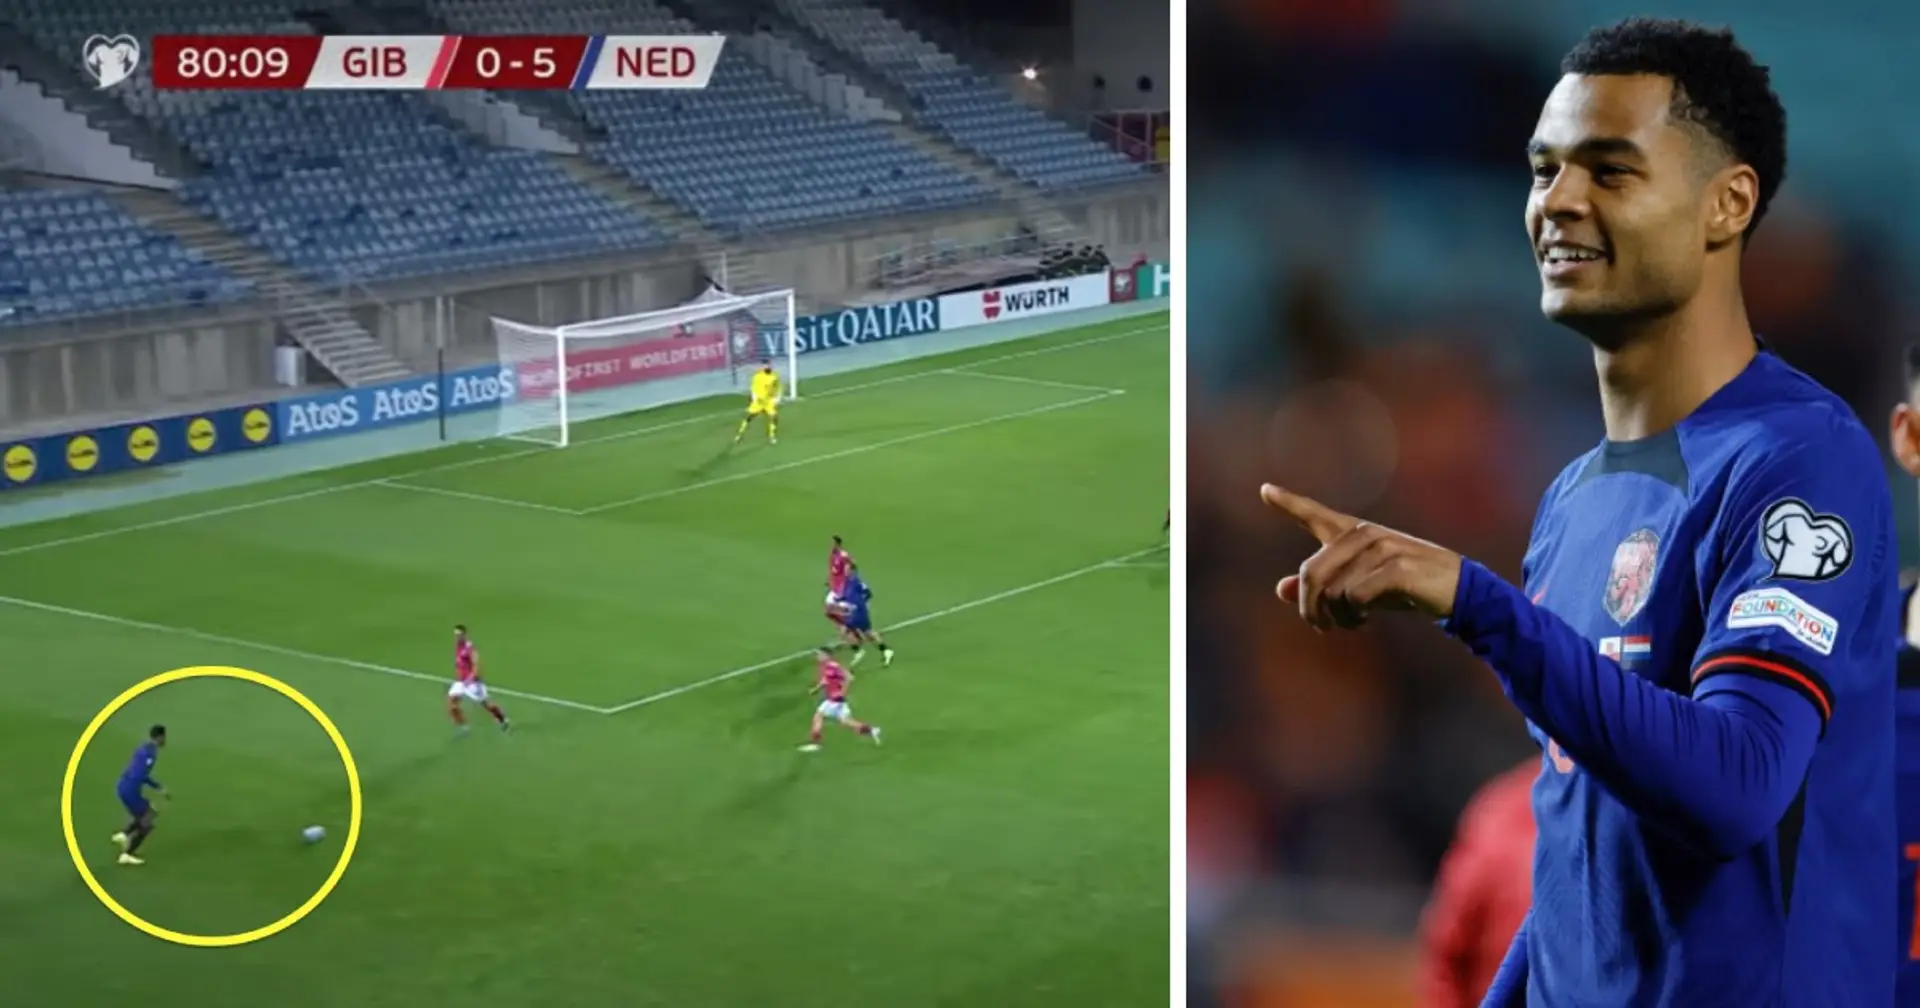 Watch: Gakpo scores from ridiculous angle as Netherlands thump Gibraltar (video)